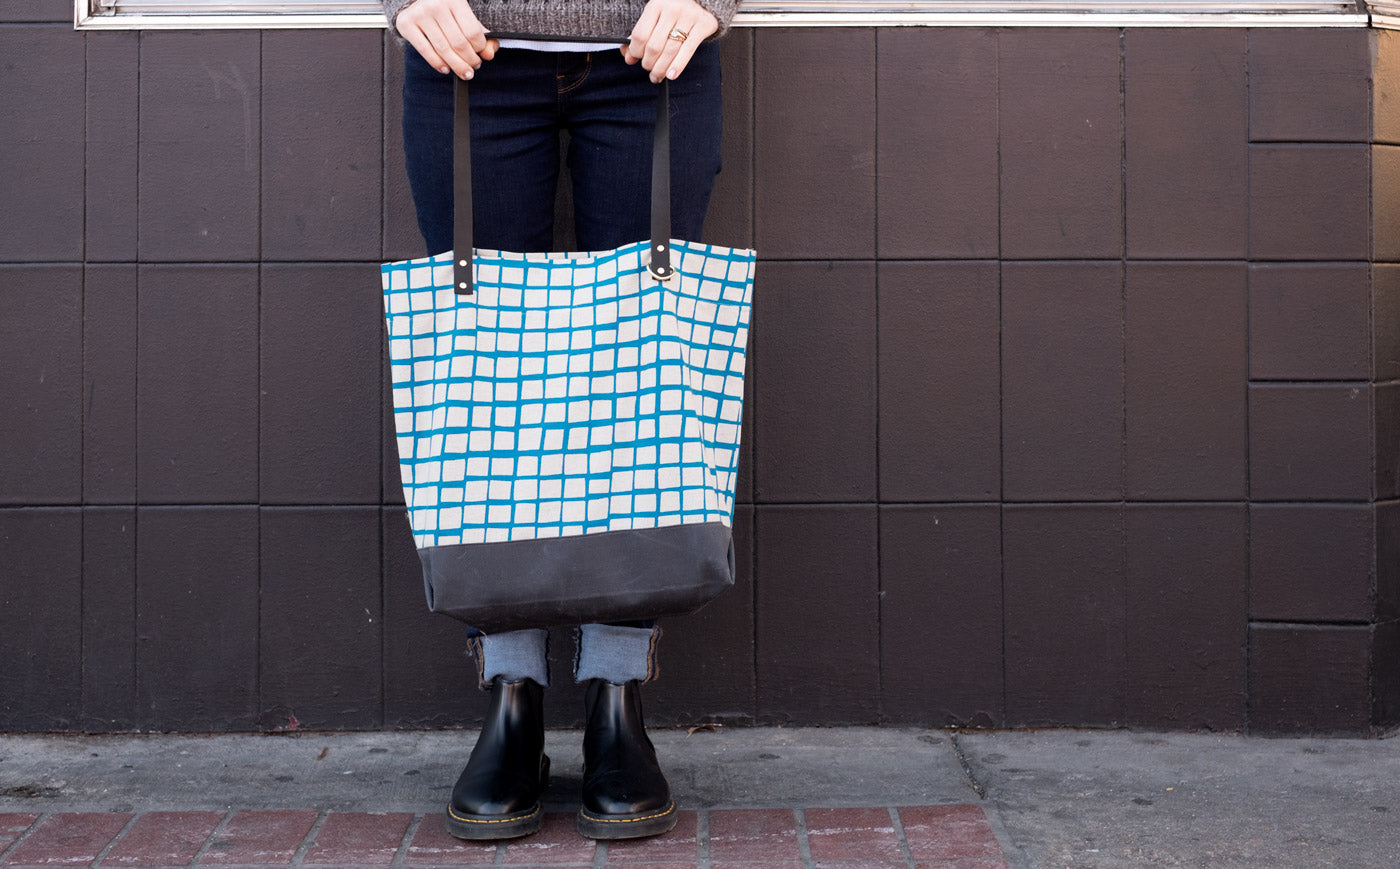 Hands Holding Katy Osterwald's Portsmith Tote